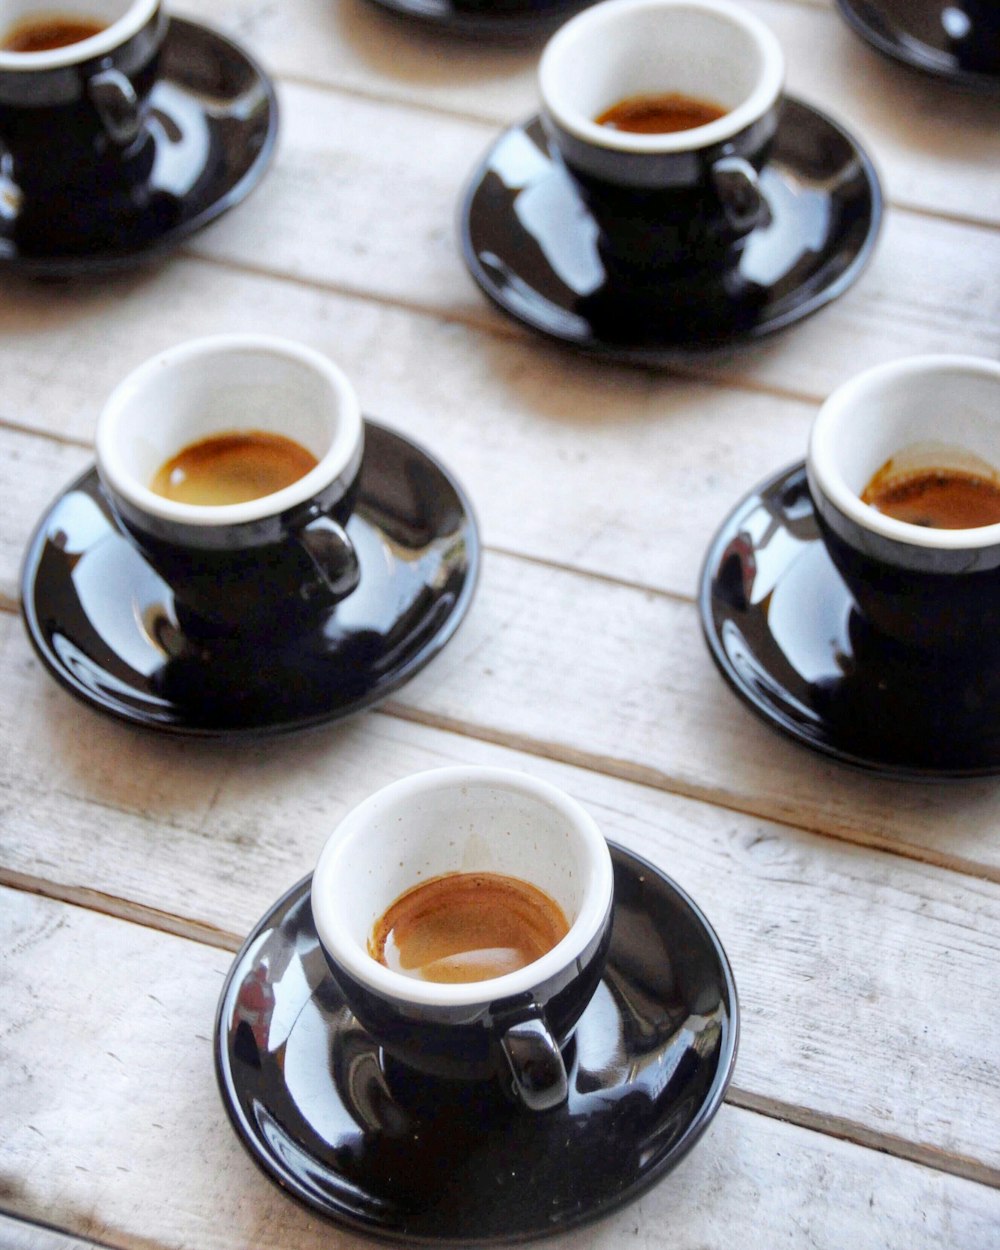 selective focus photography of four black-and-white ceramic cups and saucers